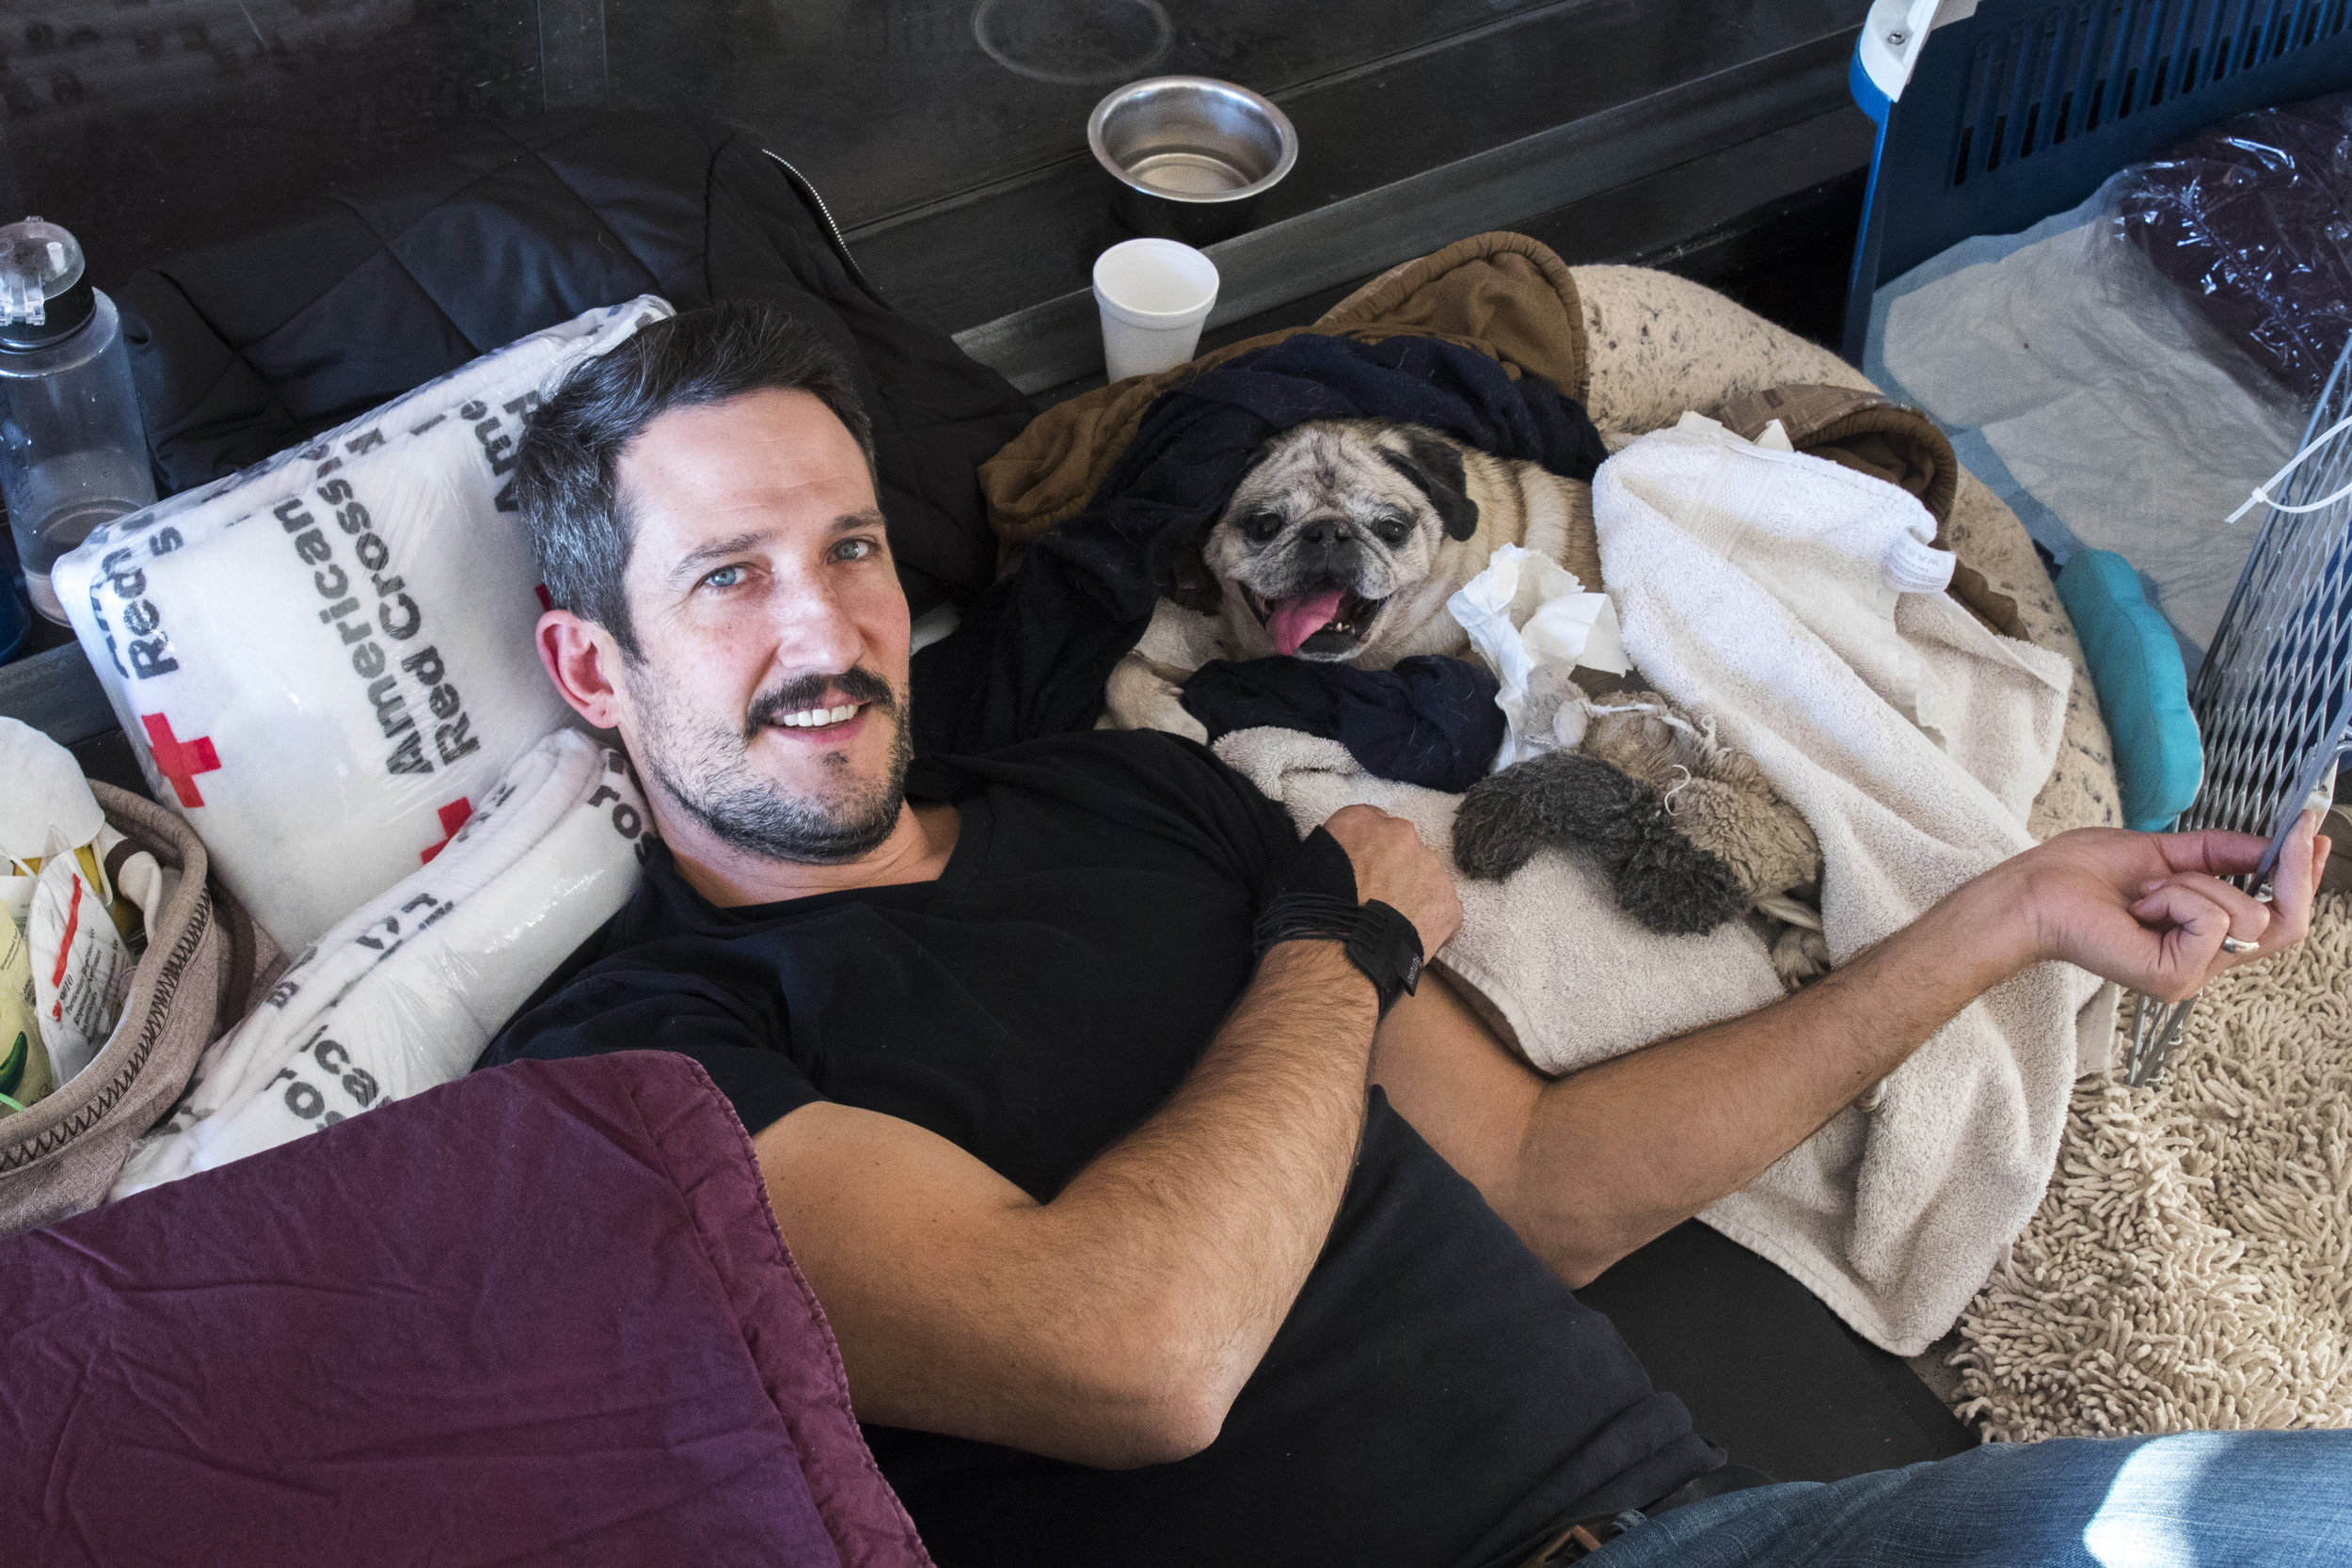  Tony D'Amore relaxes with his paralyzed dog, Bogey at an evacuatin center located at Pierce College in Woodland Hills, California on November 9, 2018. Tony said that since Bogey cannot move around due to his paralyzation, he was very happy to be at 